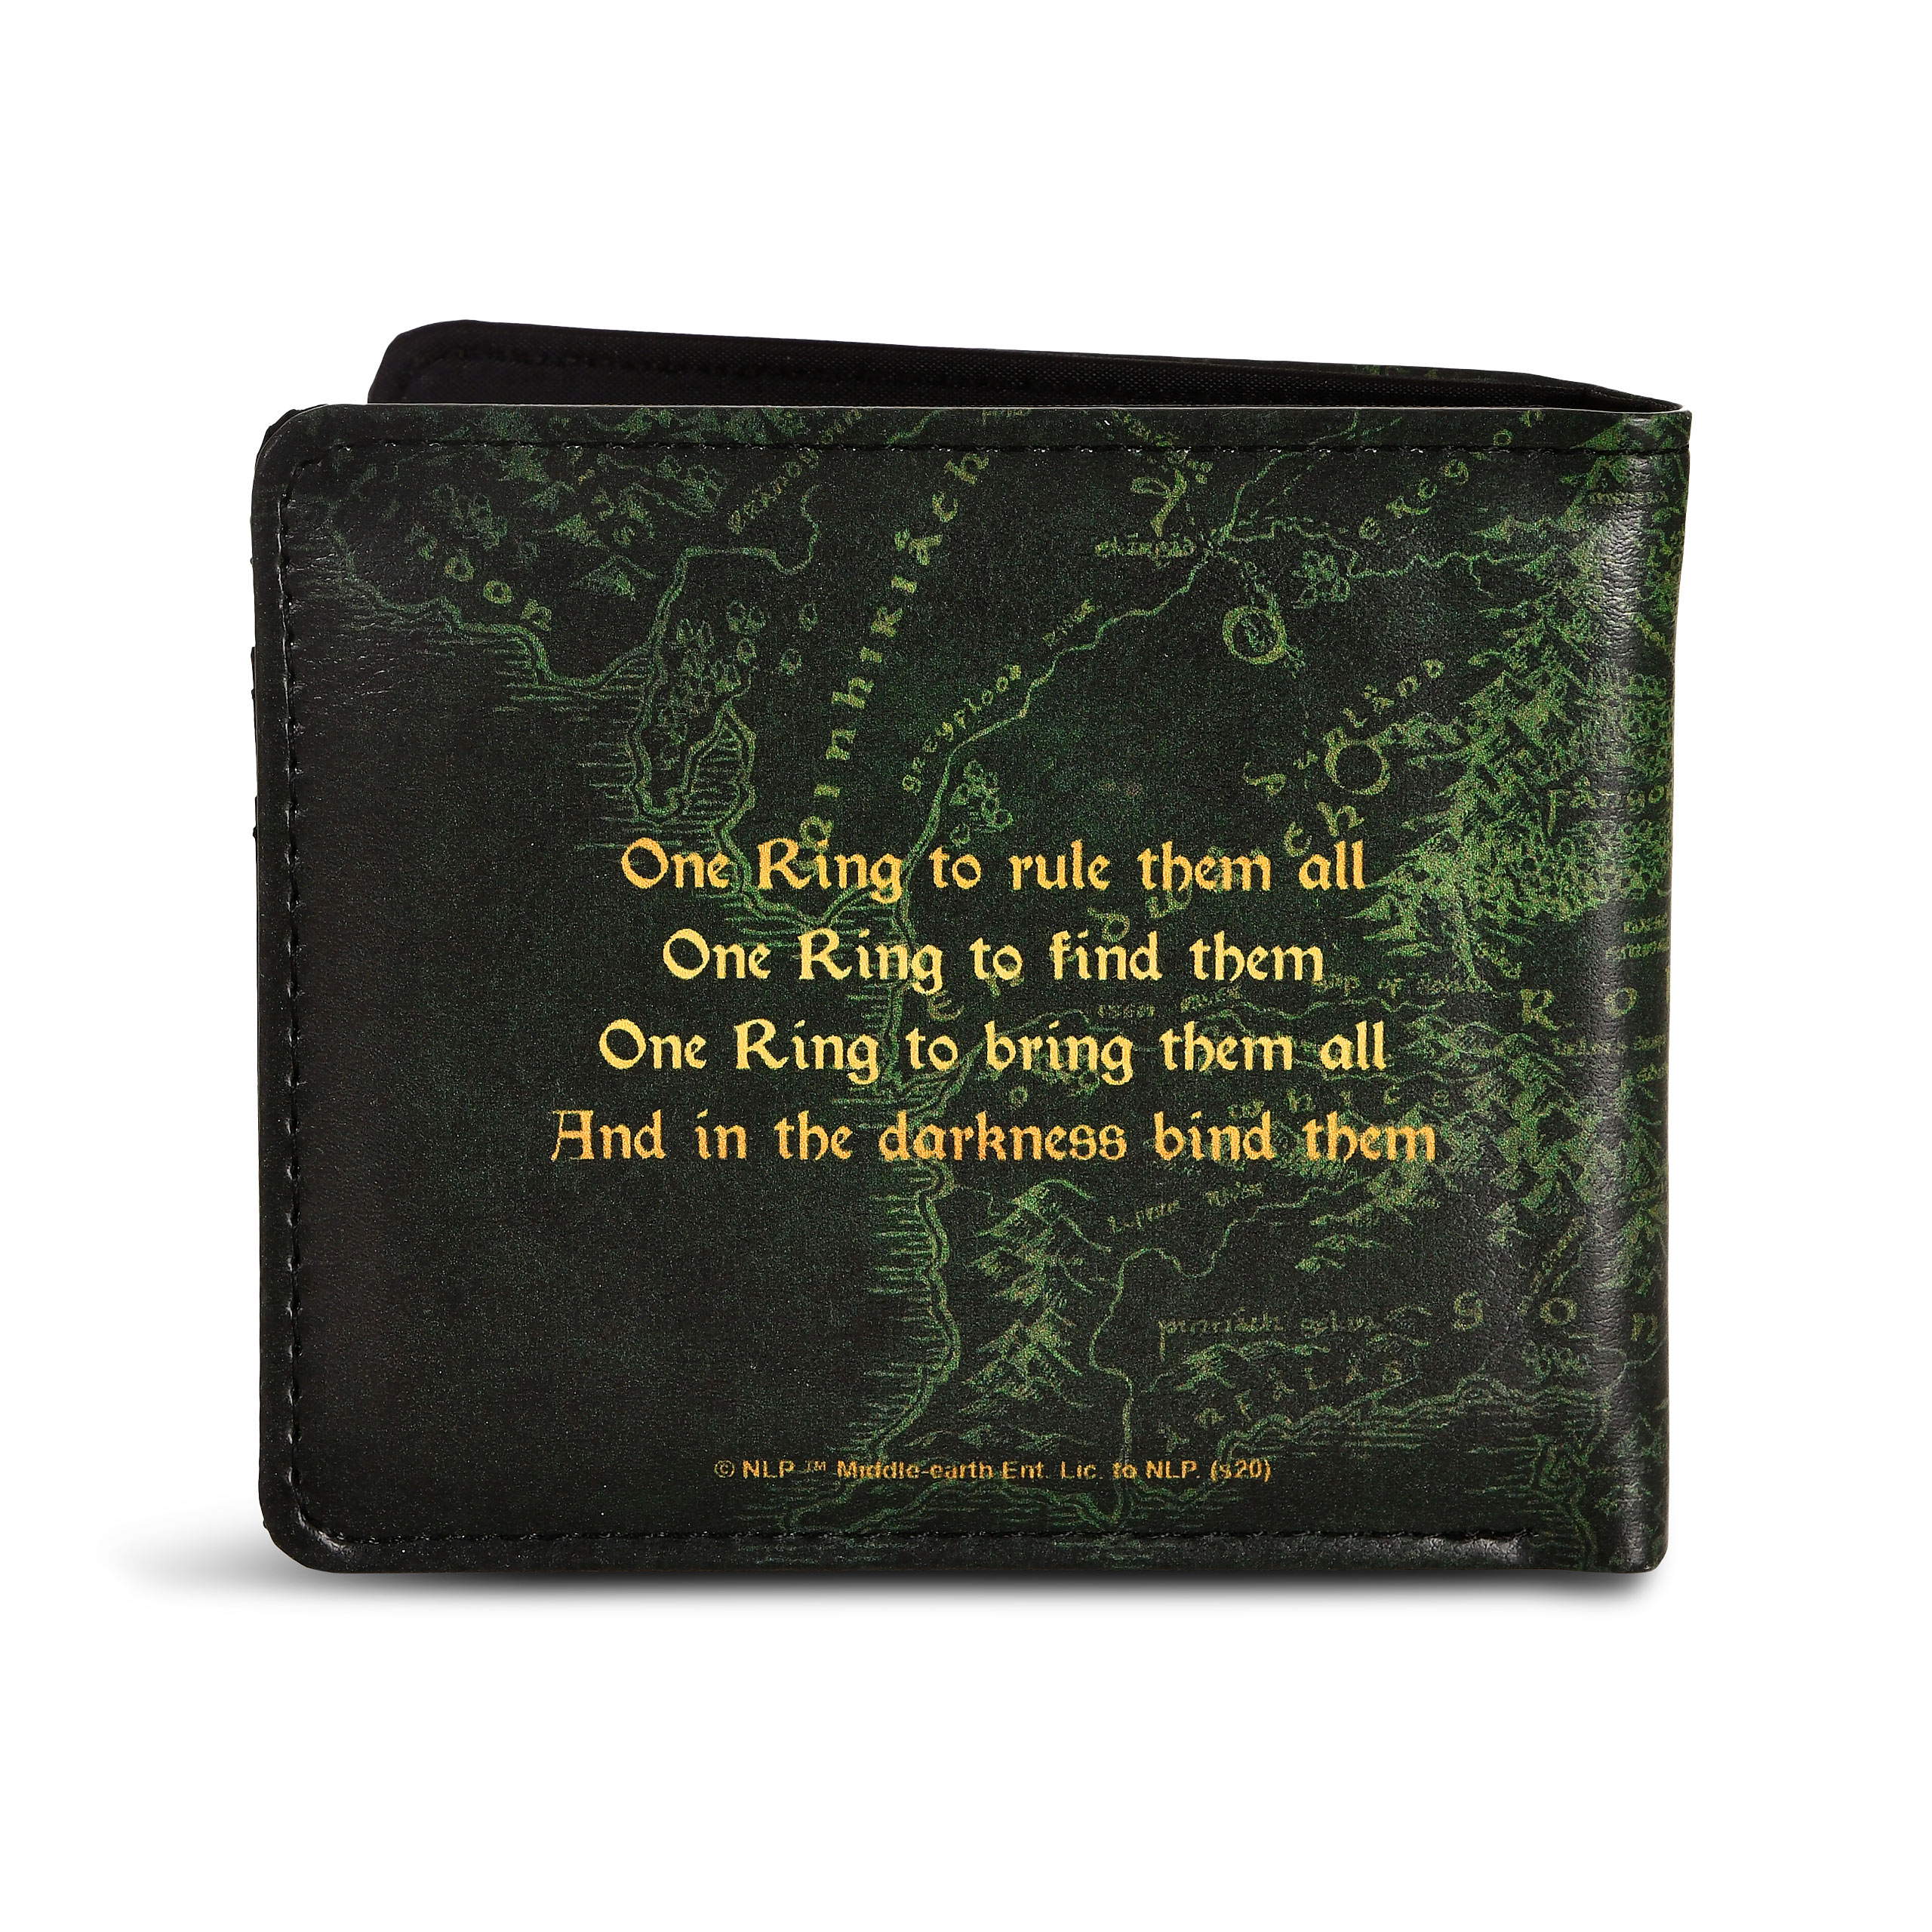 Lord of the Rings - Middle Earth Map Wallet